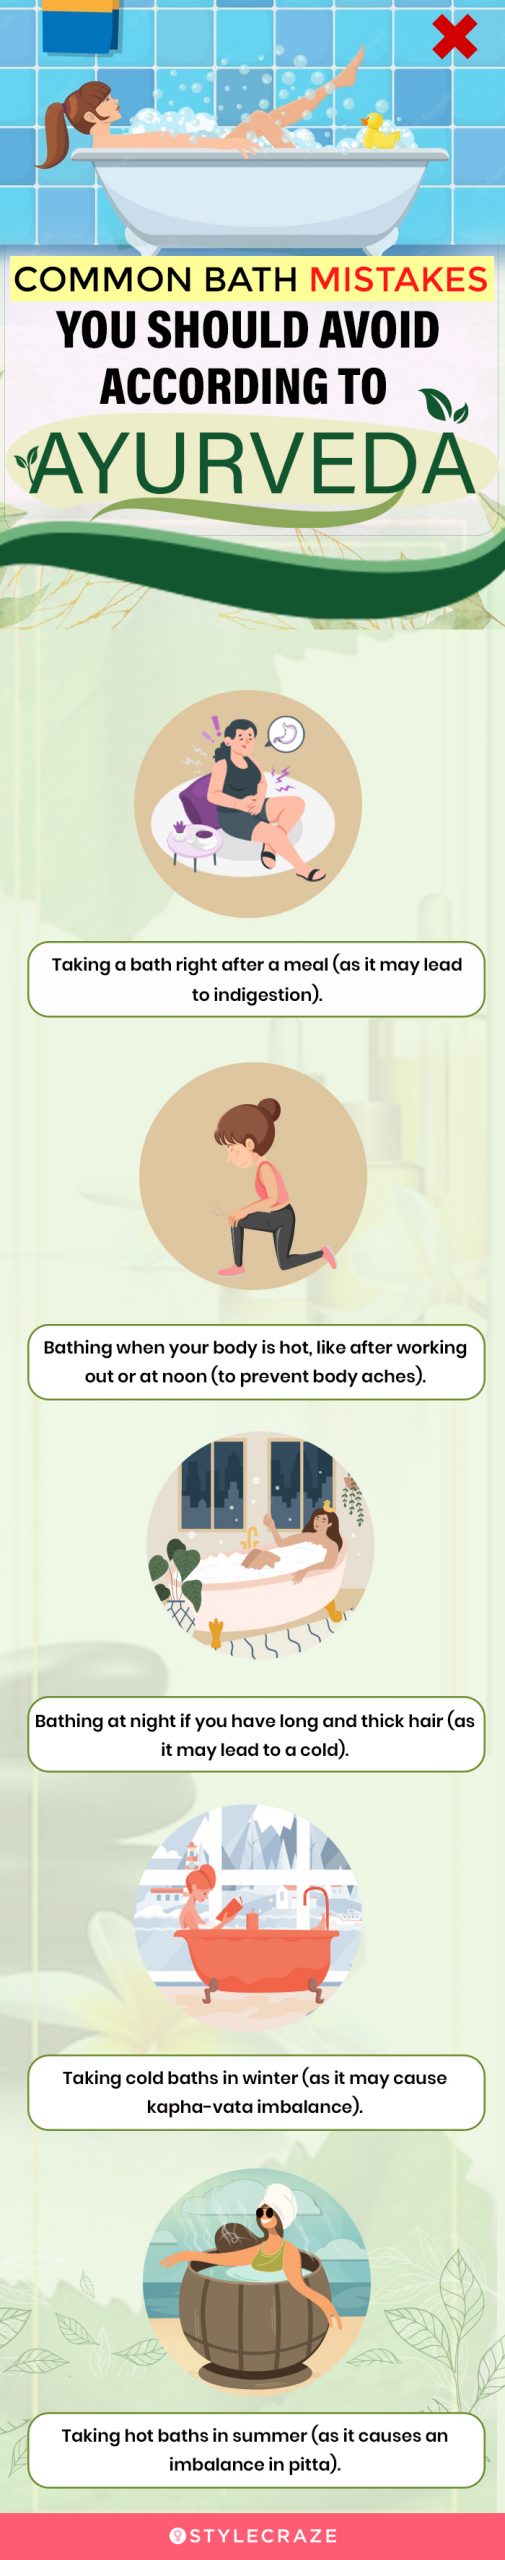 common bath mistakes you should avoid according to ayurveda (infographic)